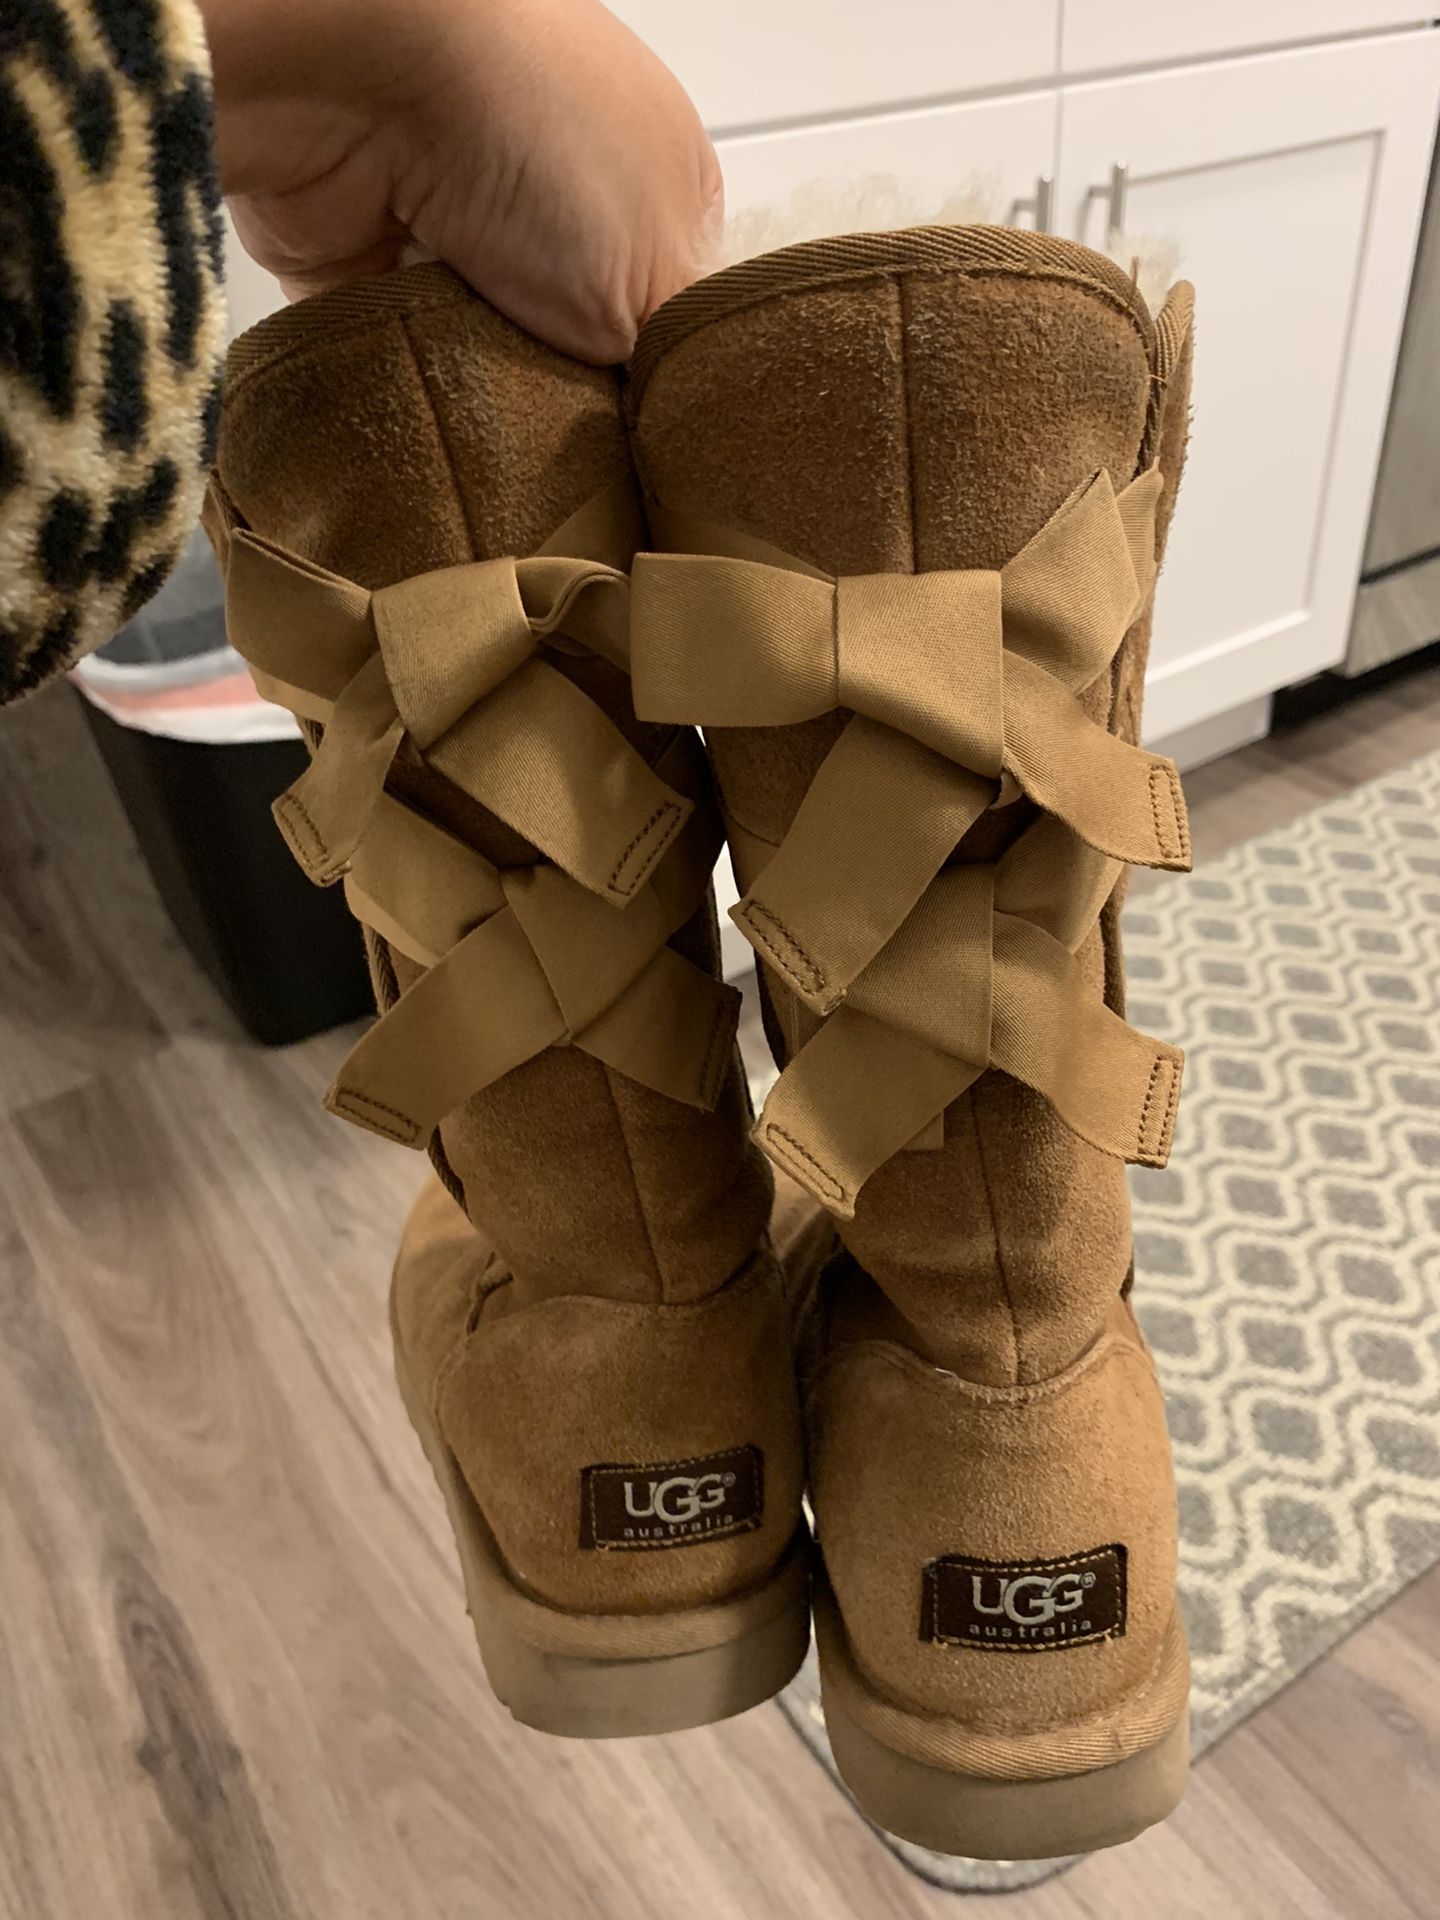 Ugg bailey Bow Boots Tall